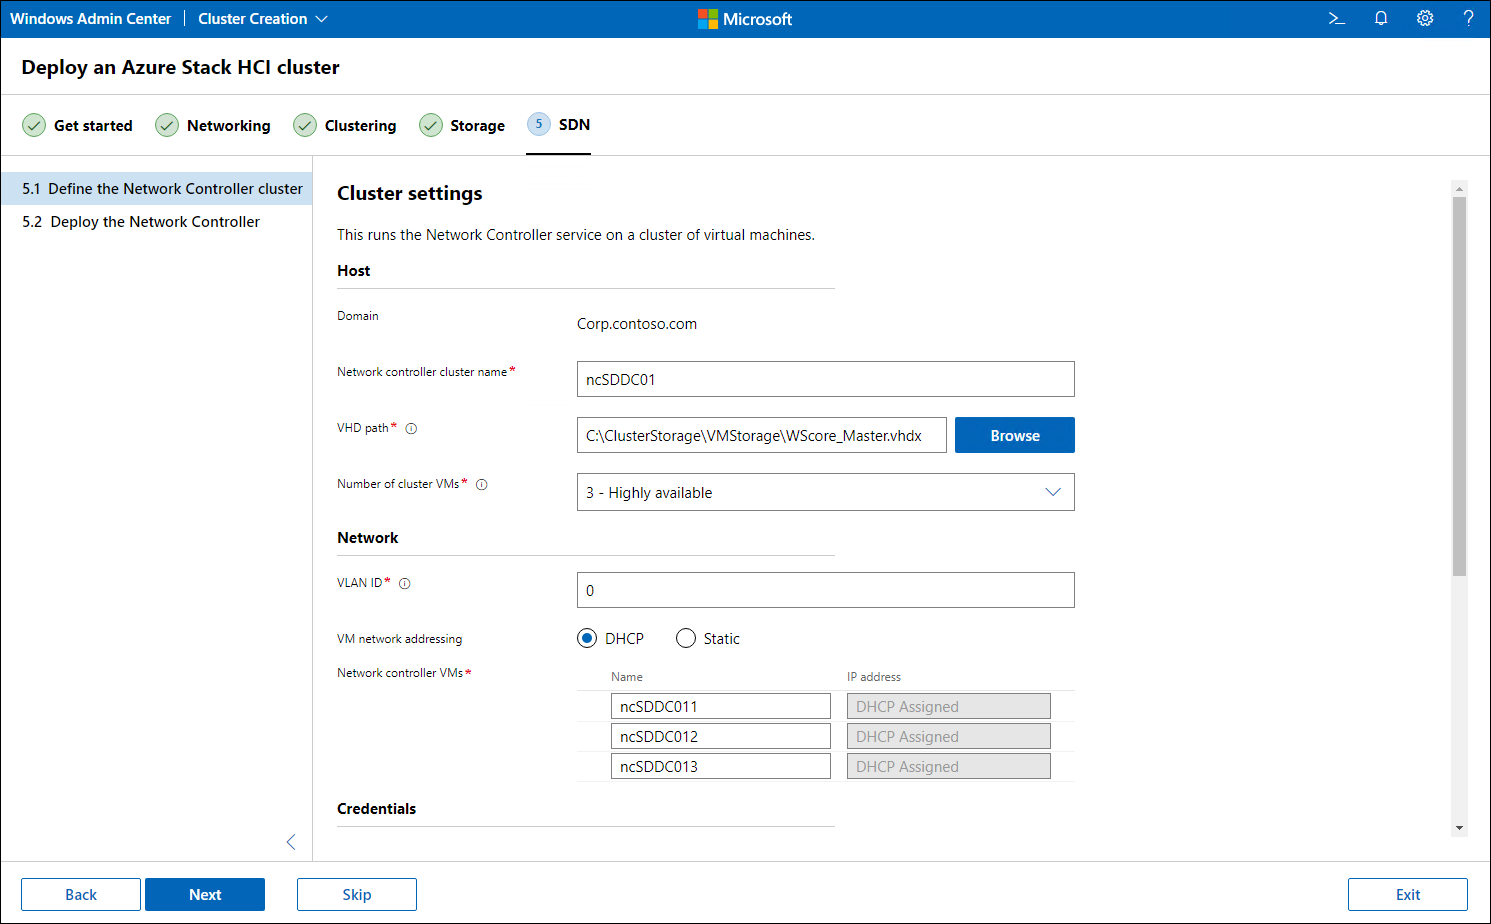 Define the Network Controller cluster pane with Host and Network settings in Windows Admin Center.